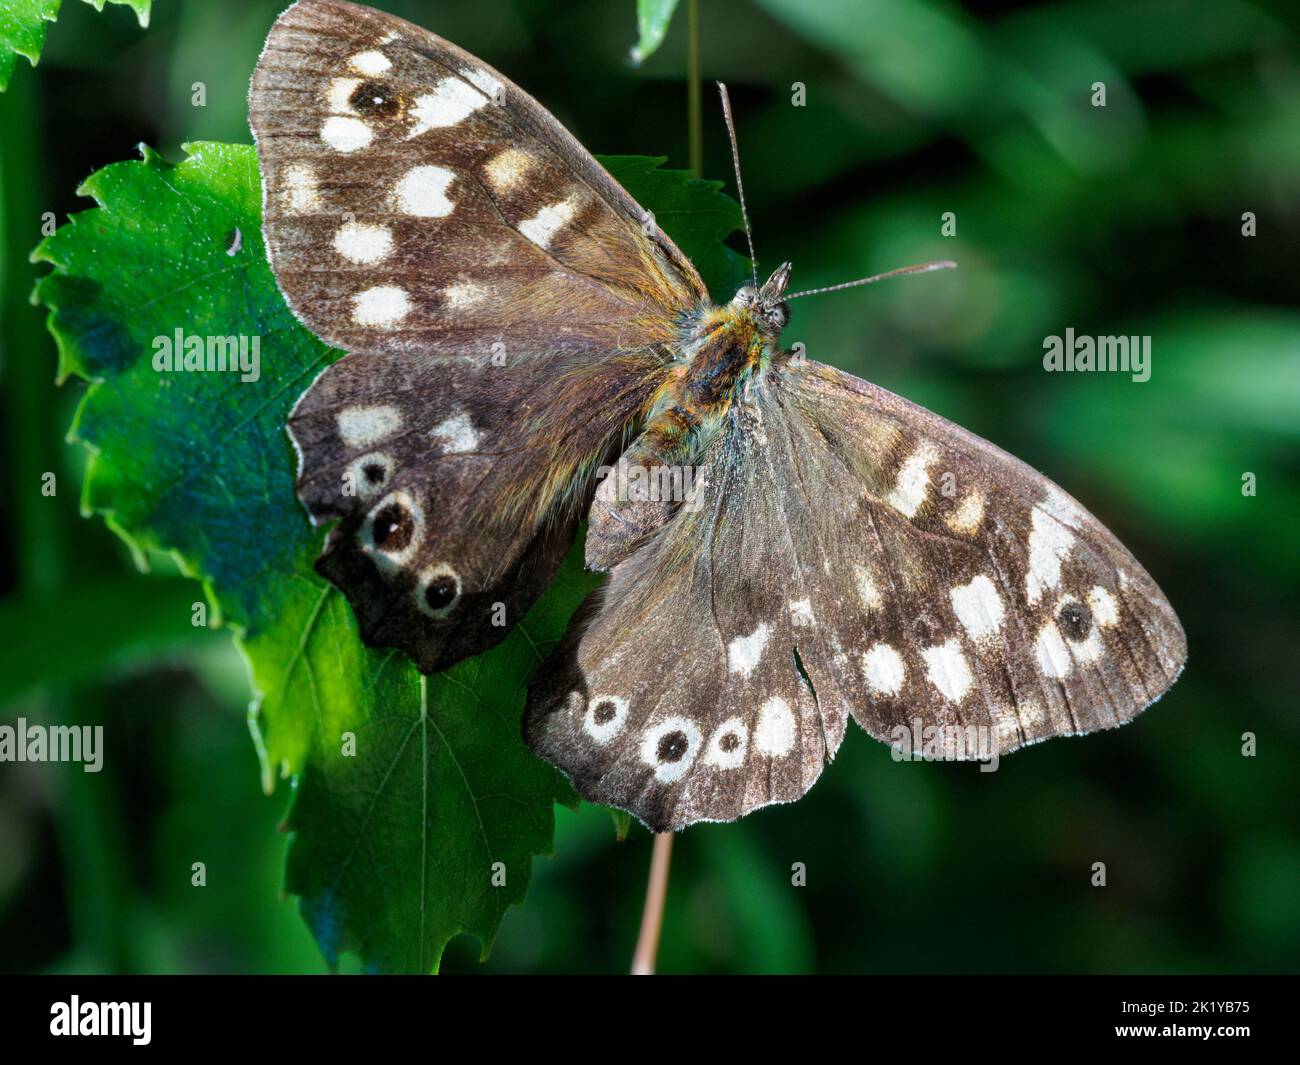 Male speckled wood butterfly (pararge aegeria) on green foliage Stock Photo